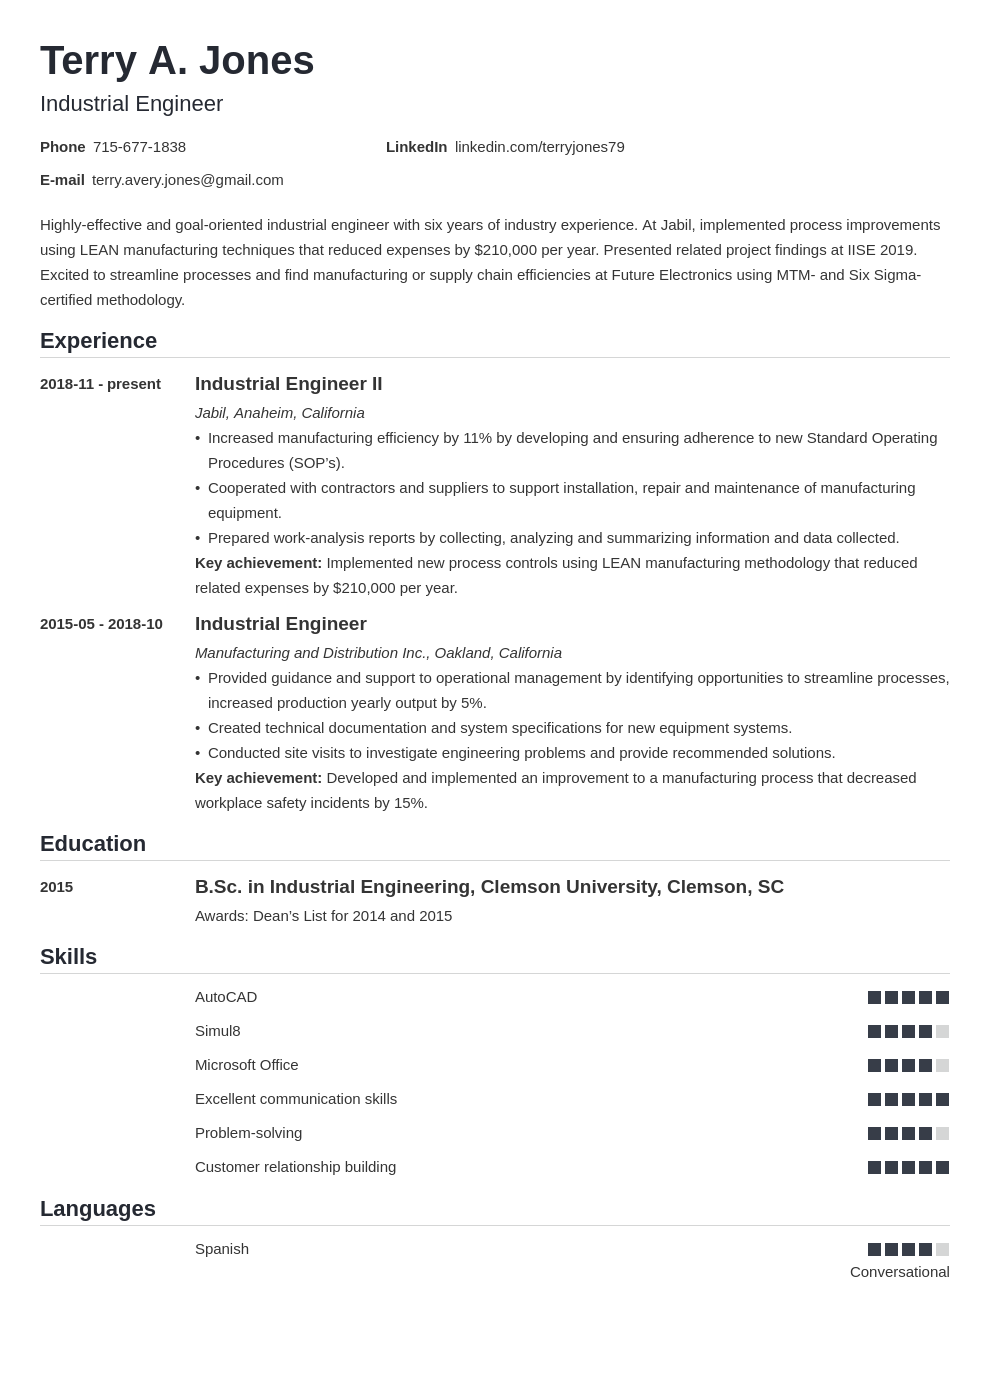 Industrial Engineer Resume Sample and Writing Guide